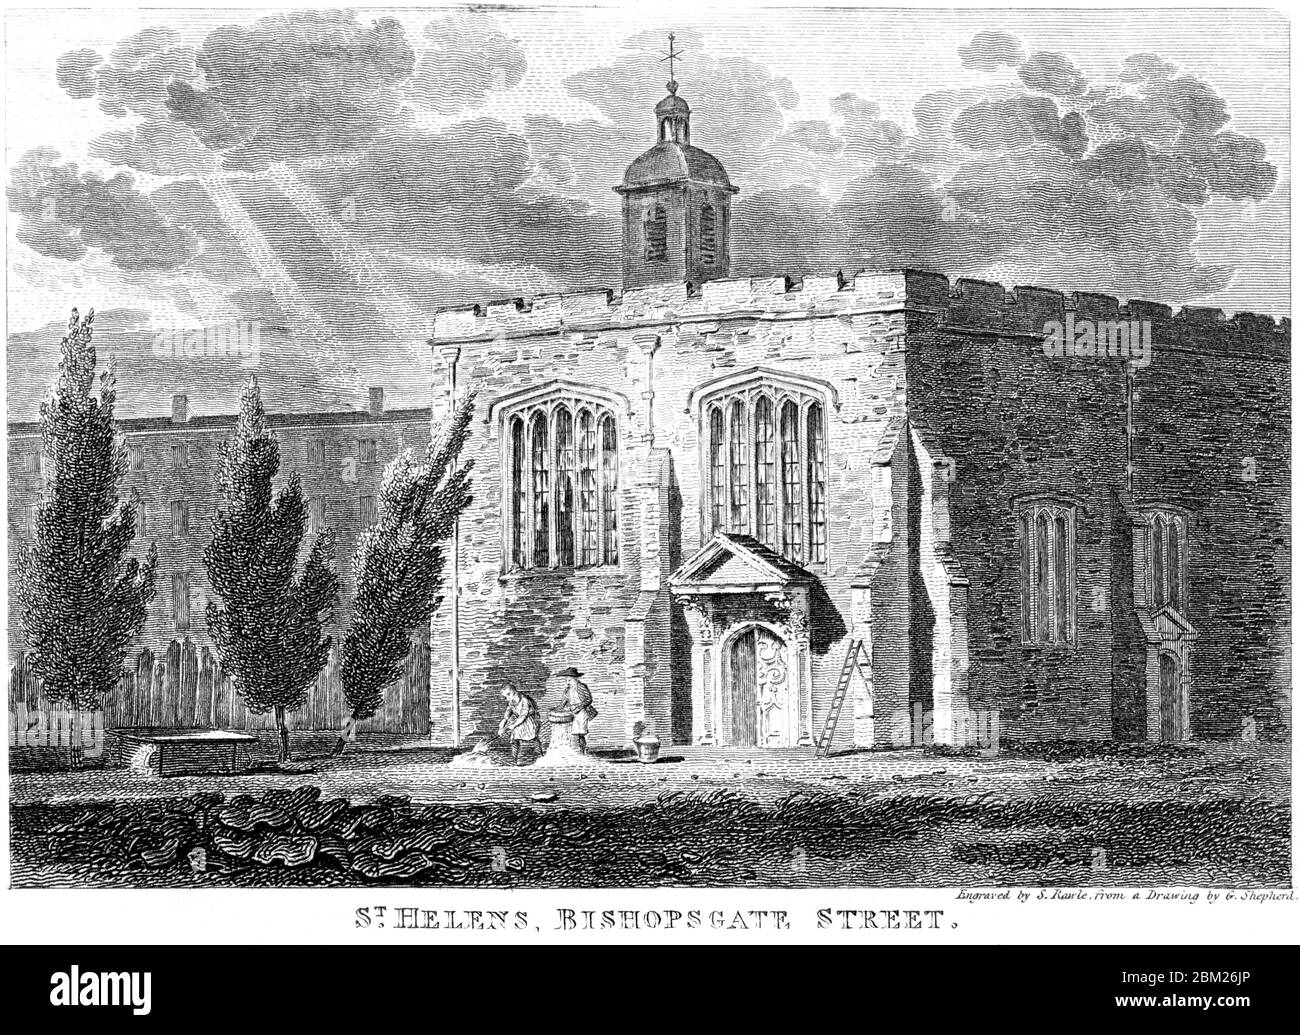 An engraving of St Helens church, Bishopsgate Street scanned at high resolution from a book printed in 1827. Believed copyright free. Stock Photo